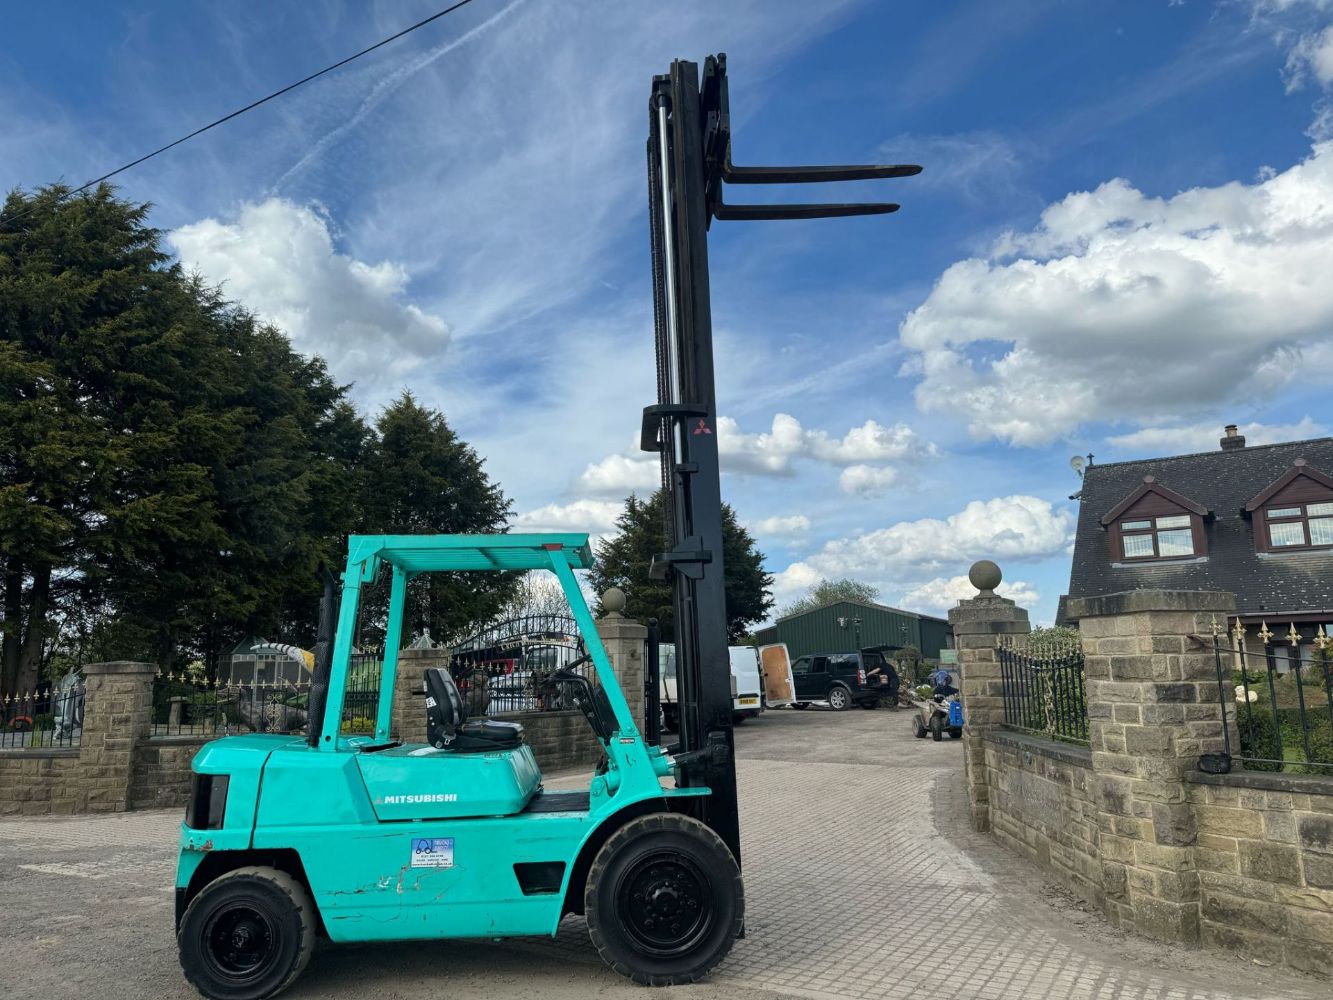 TUESDAY 12PM, MITSUBISHI 4 TON DIESEL FORKLIFT. FIAT WORKSHOP VAN, AUDI A5'S, A6'S, A7'S, DIESEL POWERED FORKLIFT, PREMIUM WATCHES + MORE